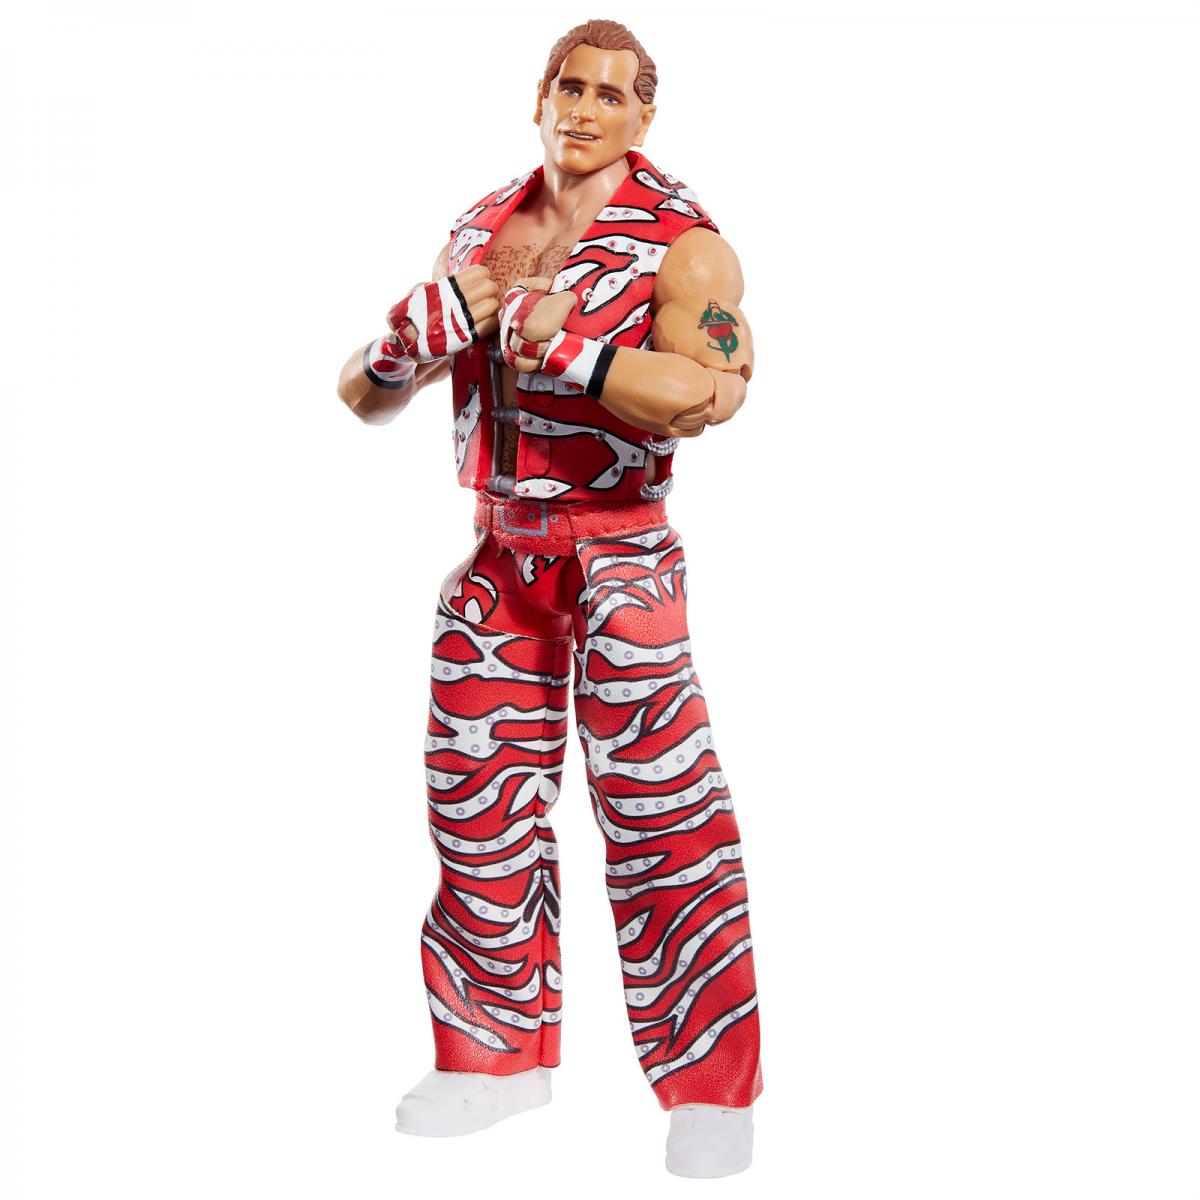 WWE Mattel Ultimate Edition Fan Takeover Shawn Michaels [Exclusive]